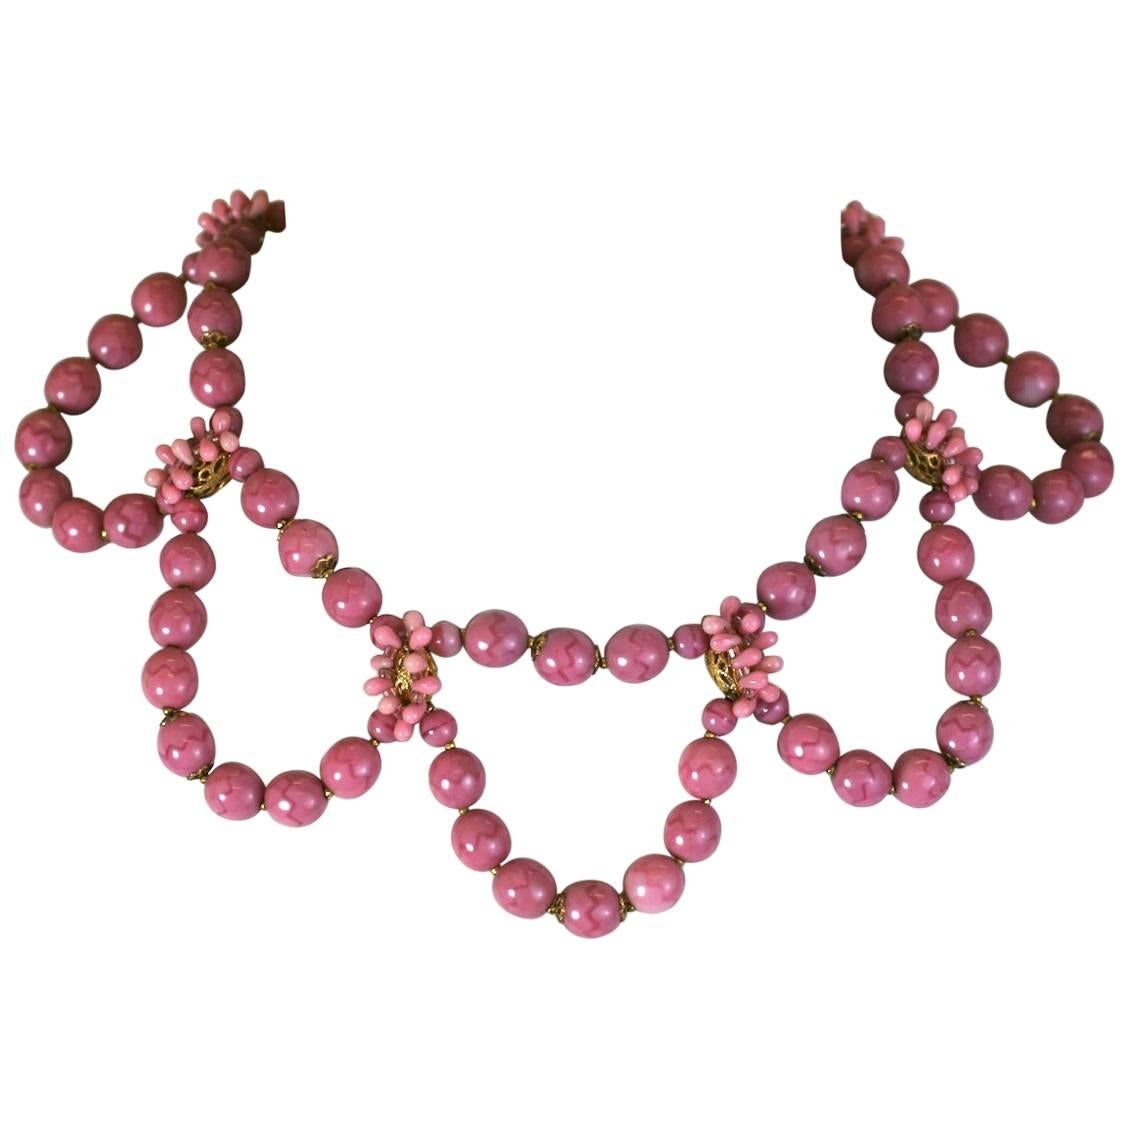 Miriam Haskell Dusty Rose Pate de Verre Swag Necklace For Sale